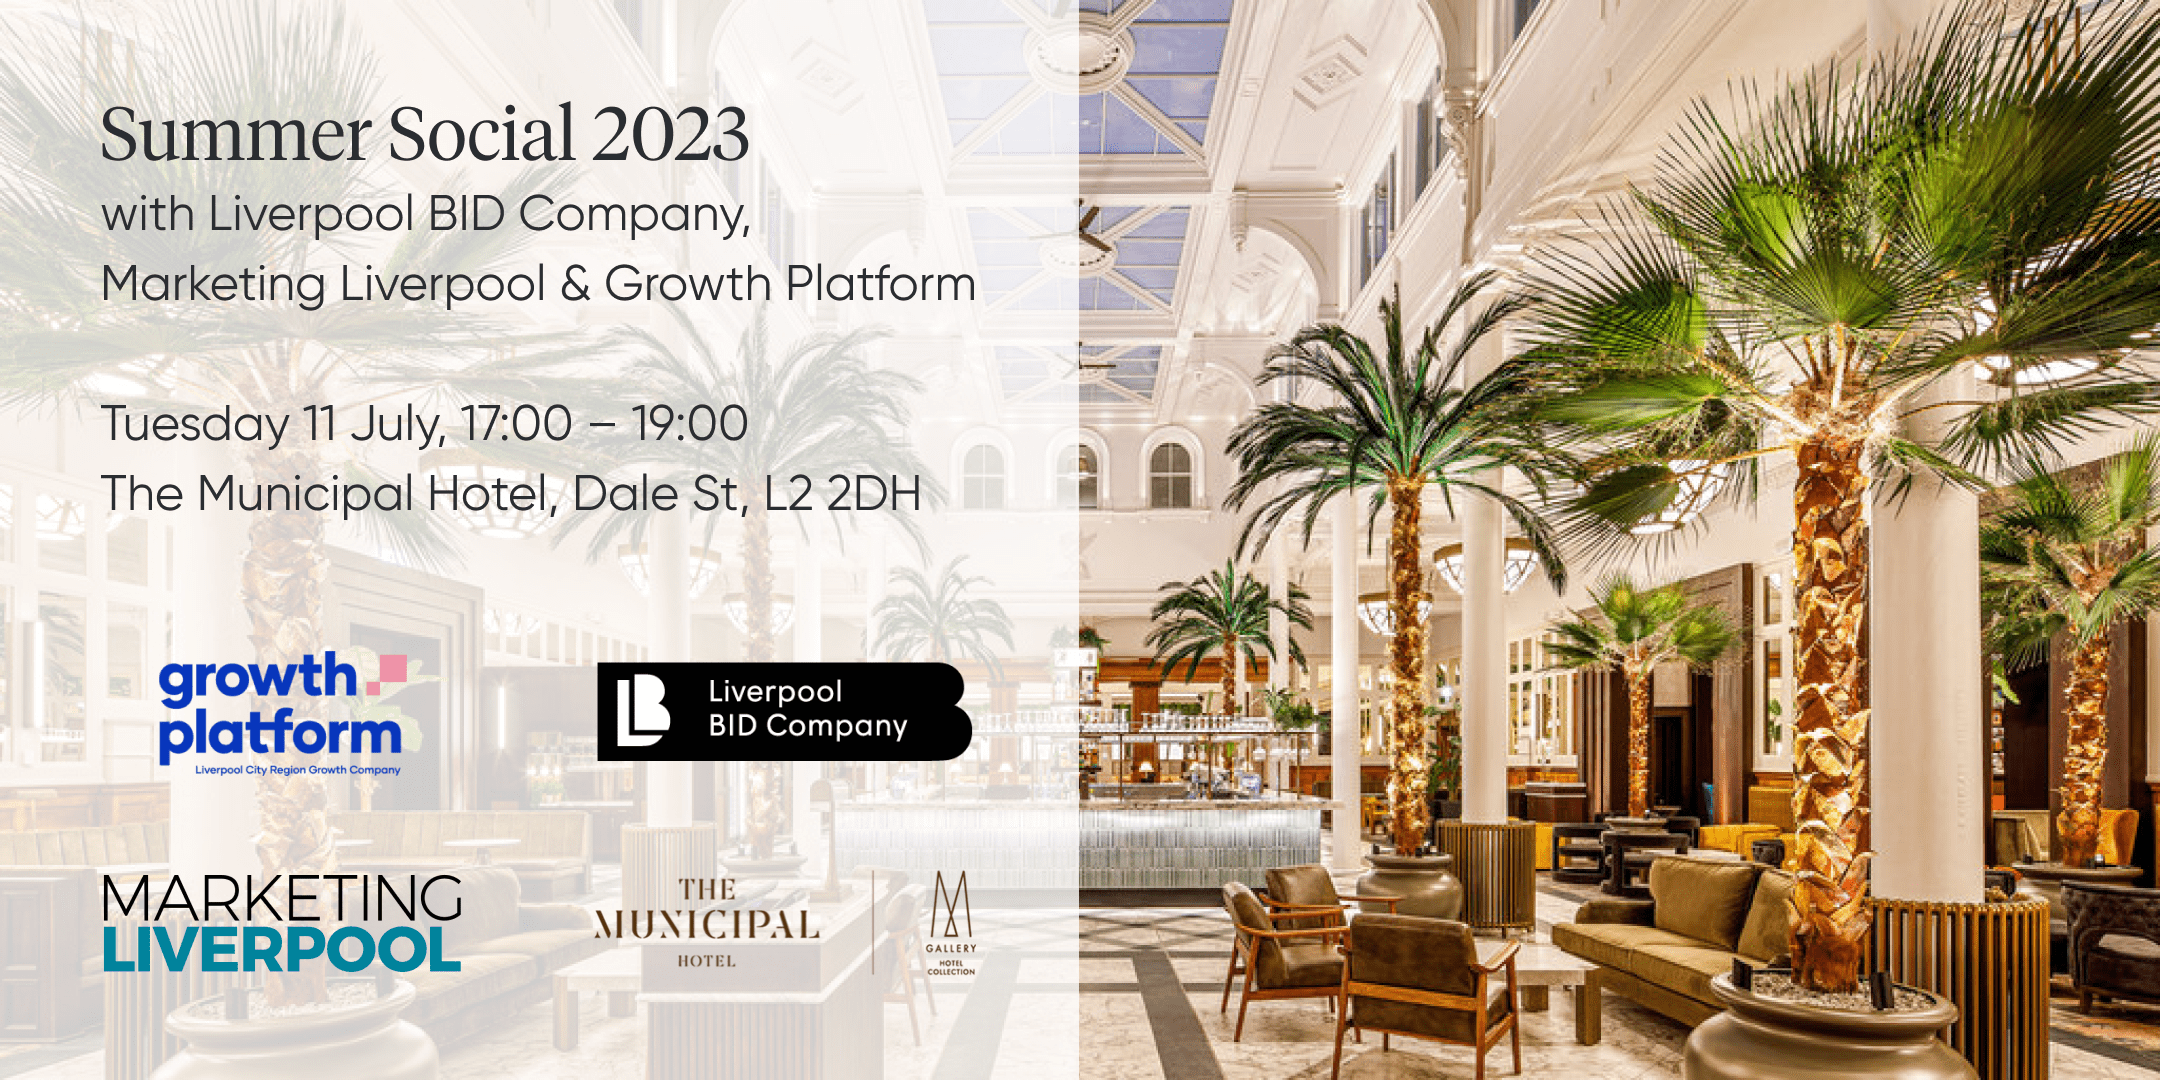 Join Liverpool BID Company, Growth Platform and Marketing Liverpool for a Summer Social of networking, drinks and nibbles at the spectacular Palm Court in The Municipal Hotel.